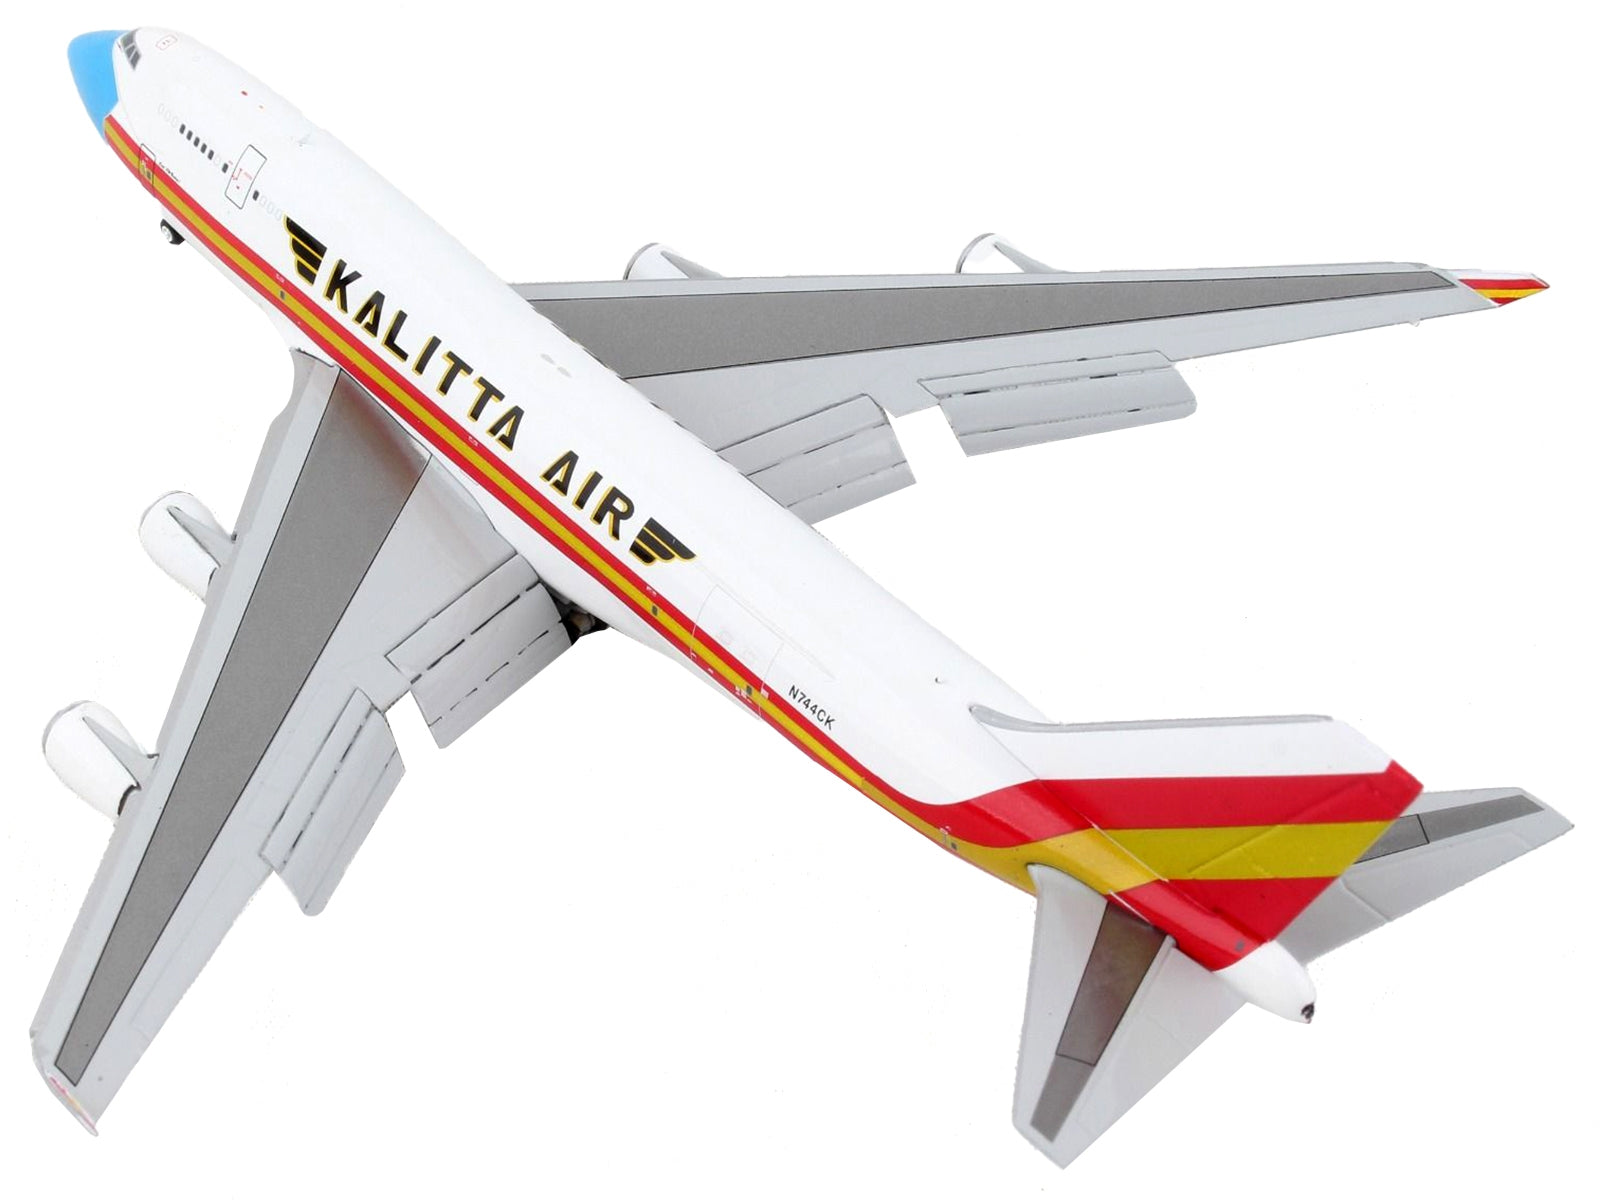 Boeing 747-400F Commercial Aircraft with Flaps Down "Kalitta Air" White with Stripes "Mask" Livery 1/400 Diecast Model Airplane by GeminiJets